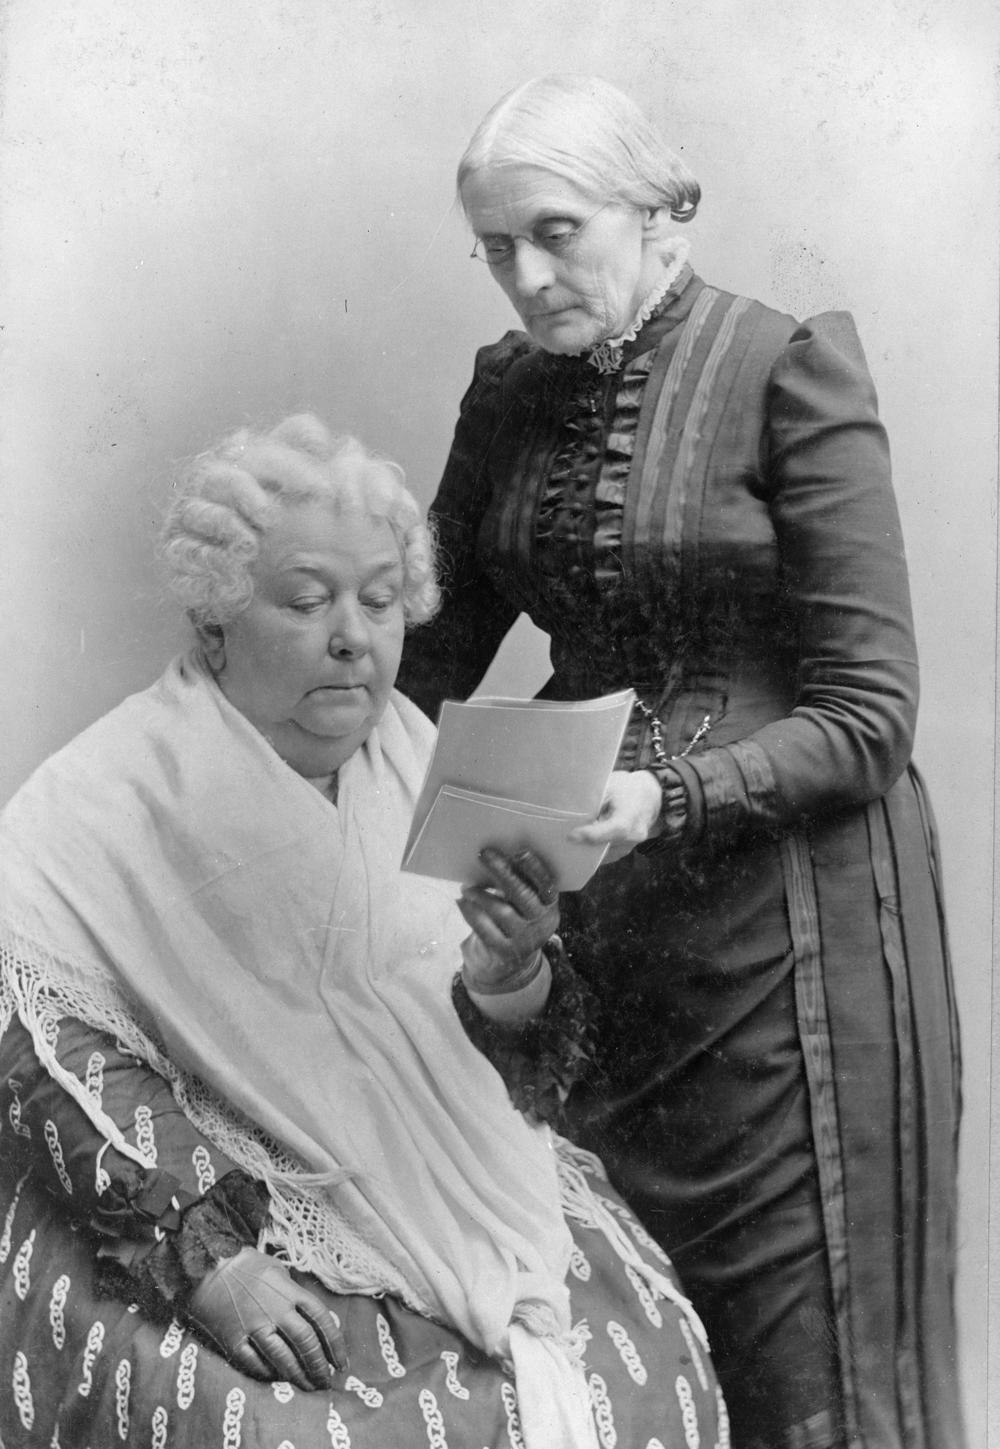 Early suffragist leaders Elizabeth Cady Stanton (left) and Susan B. Anthony later split off from their alliance with abolitionists.